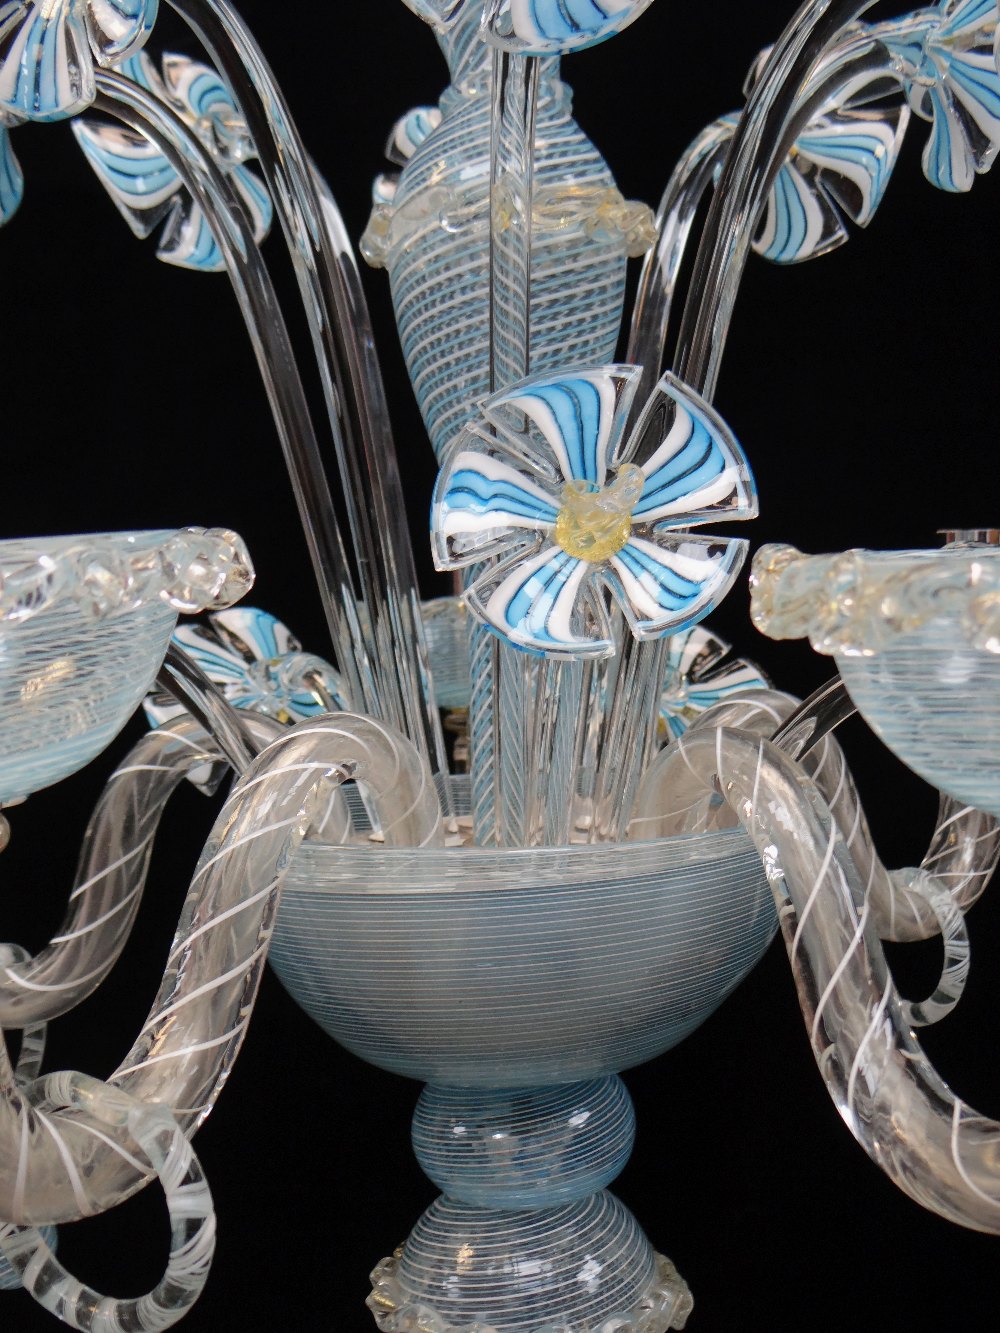 MODERN ITALIAN GLASS FIVE-LIGHT CHANDELIER, probably Murano, latticino blue and opaque white glass - Image 4 of 9